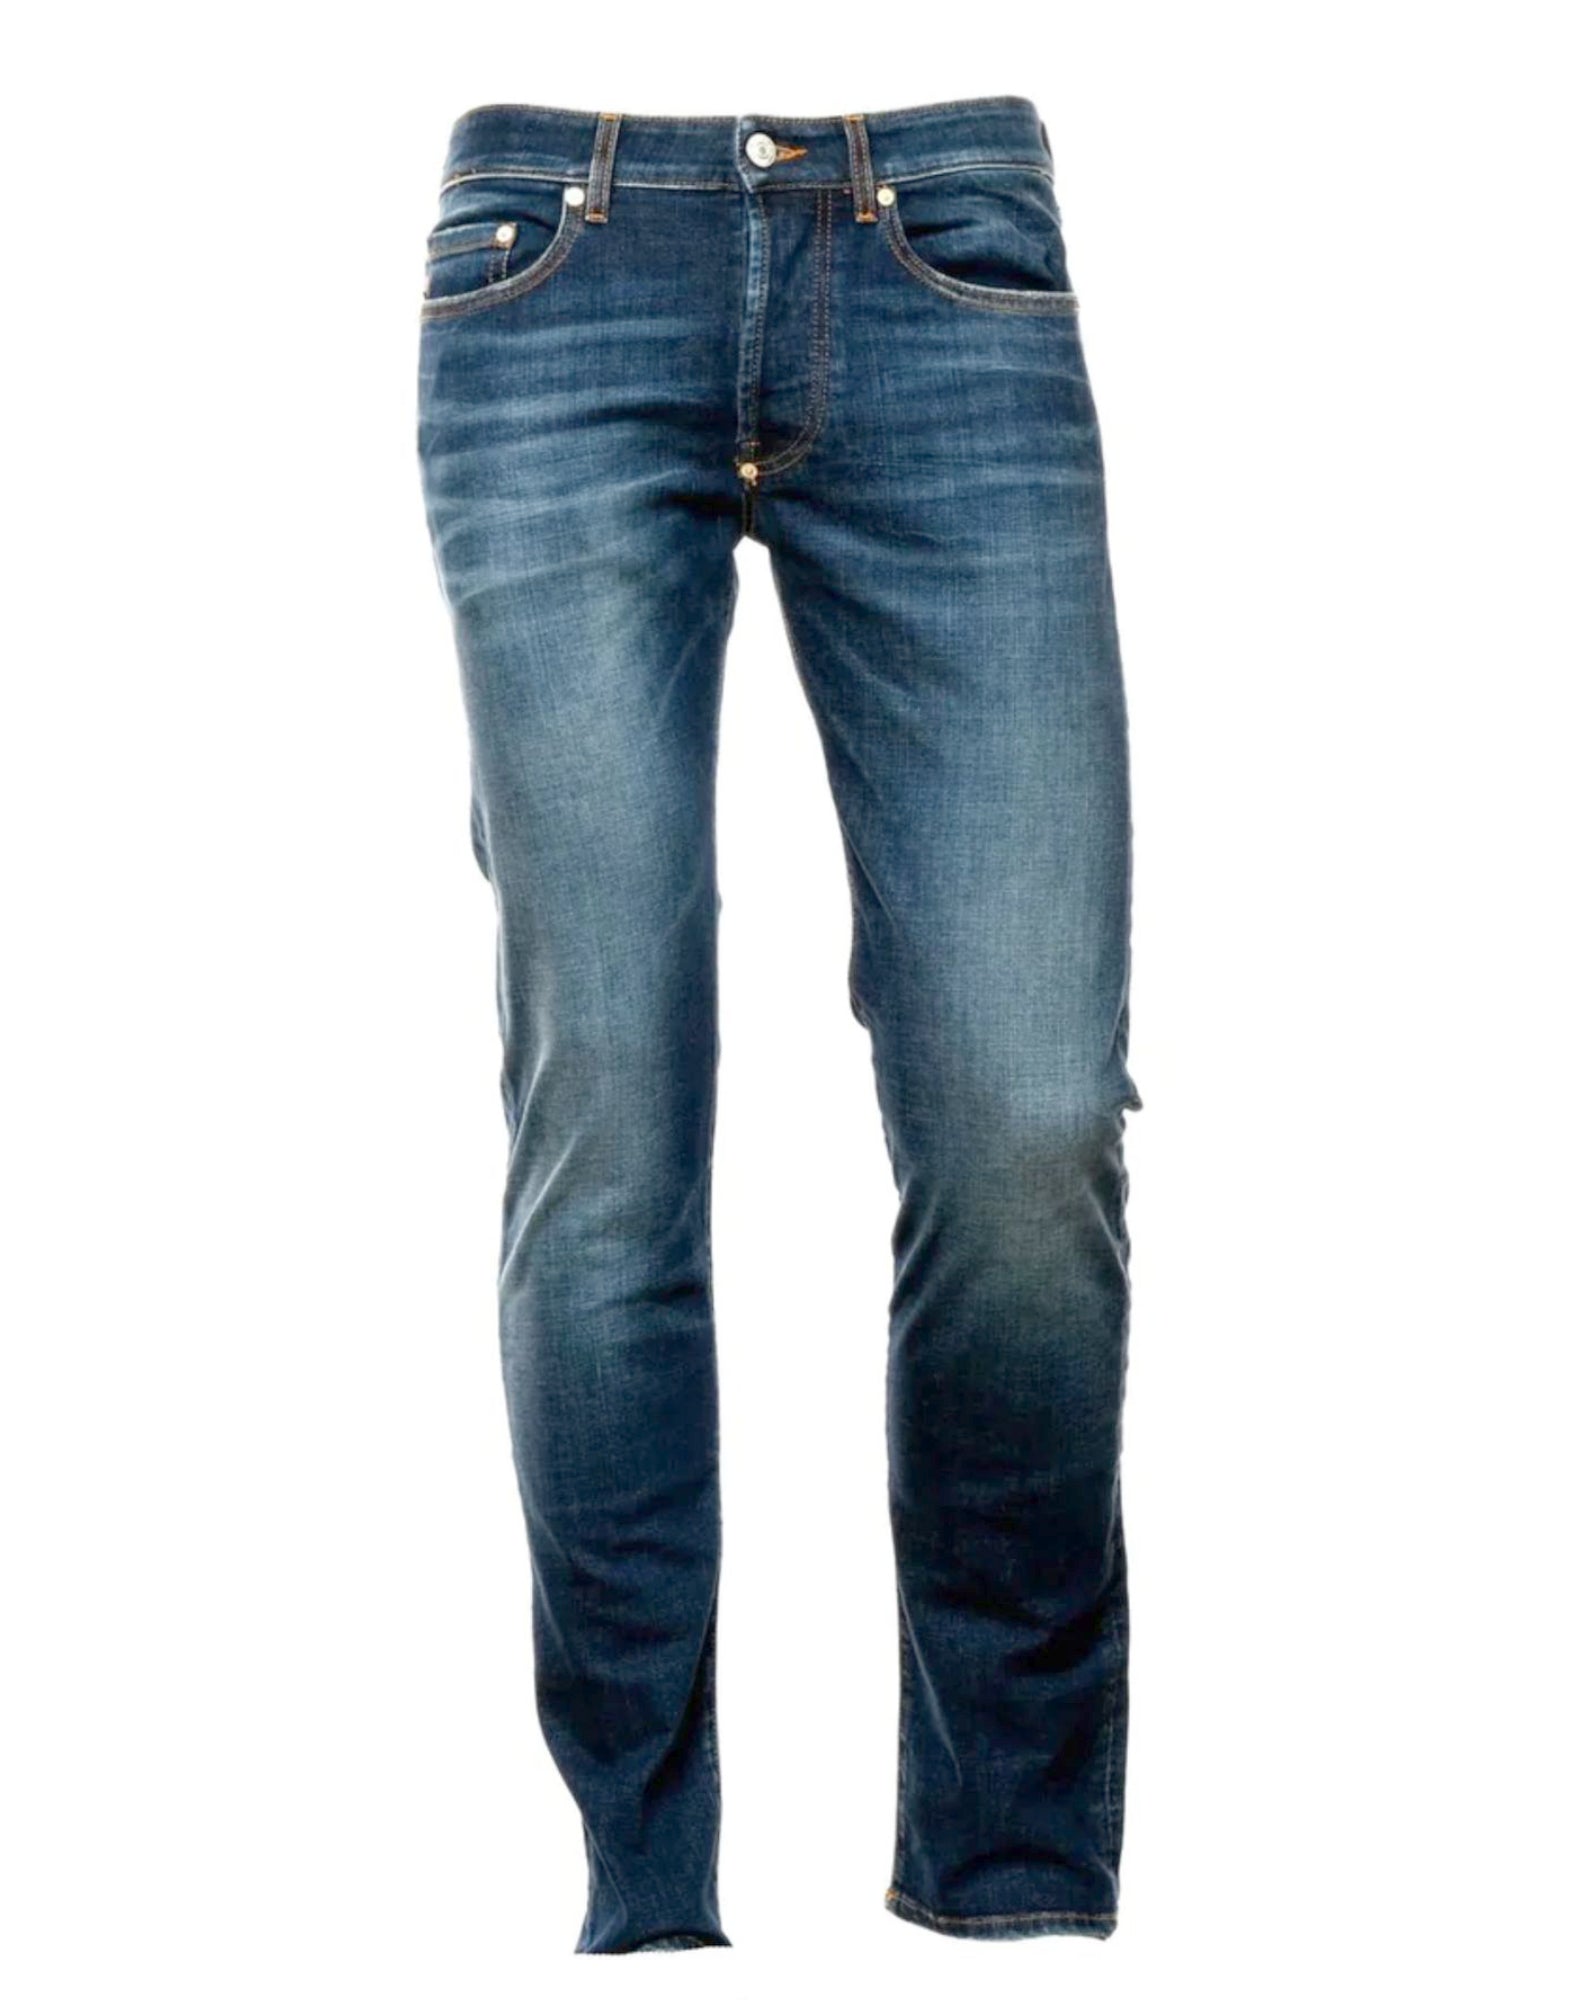 Jeans for man 23WBLUP03461 006541 D153 Blauer